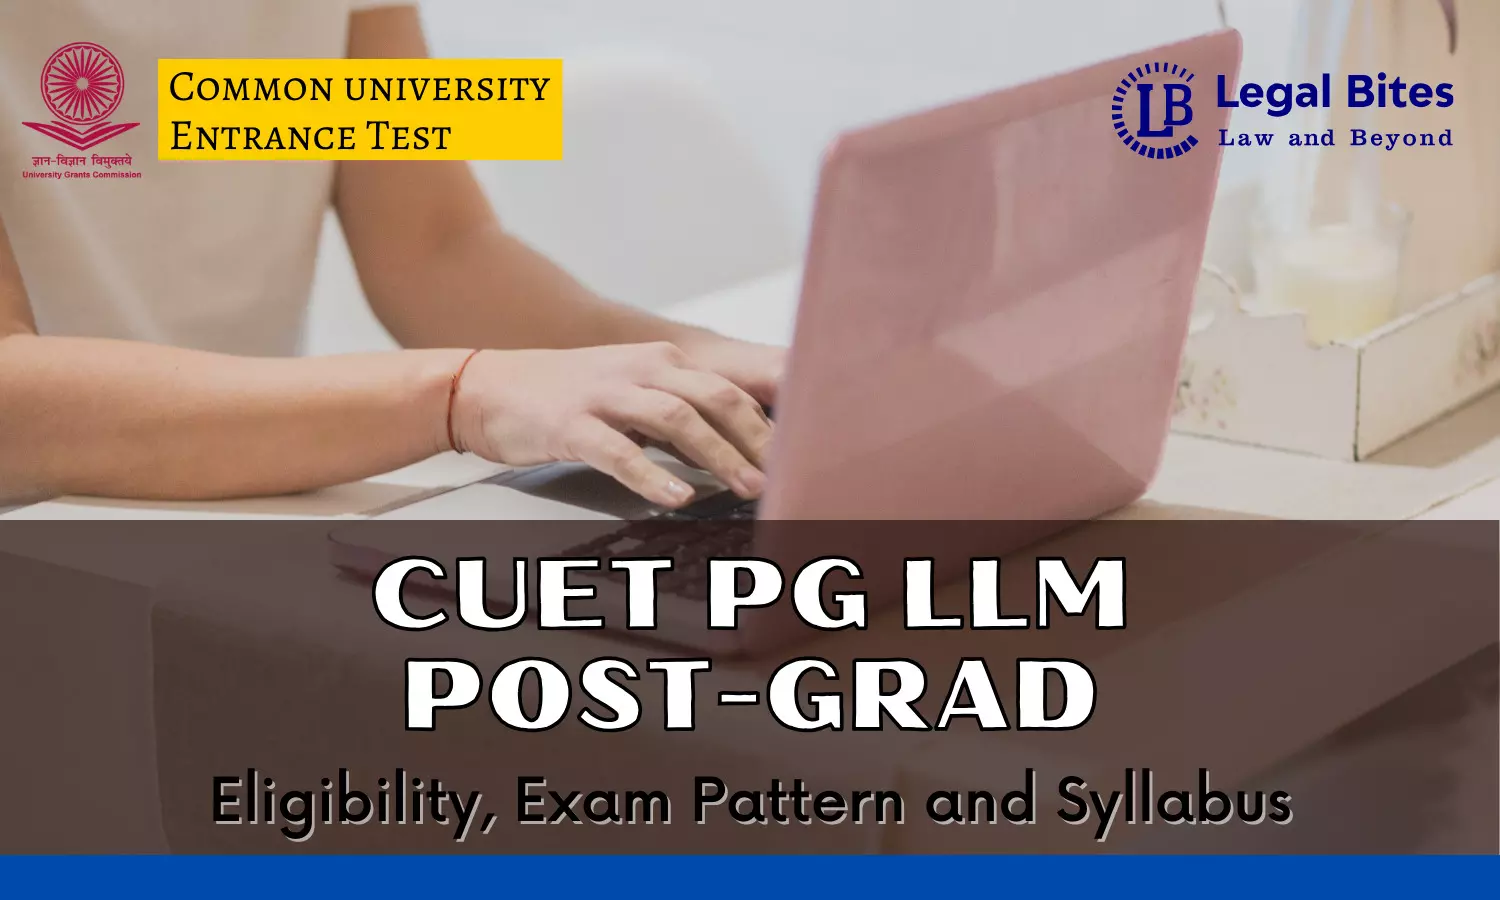 CUET LLM | Eligibility, Exam Pattern & Syllabus - All You Need to Know